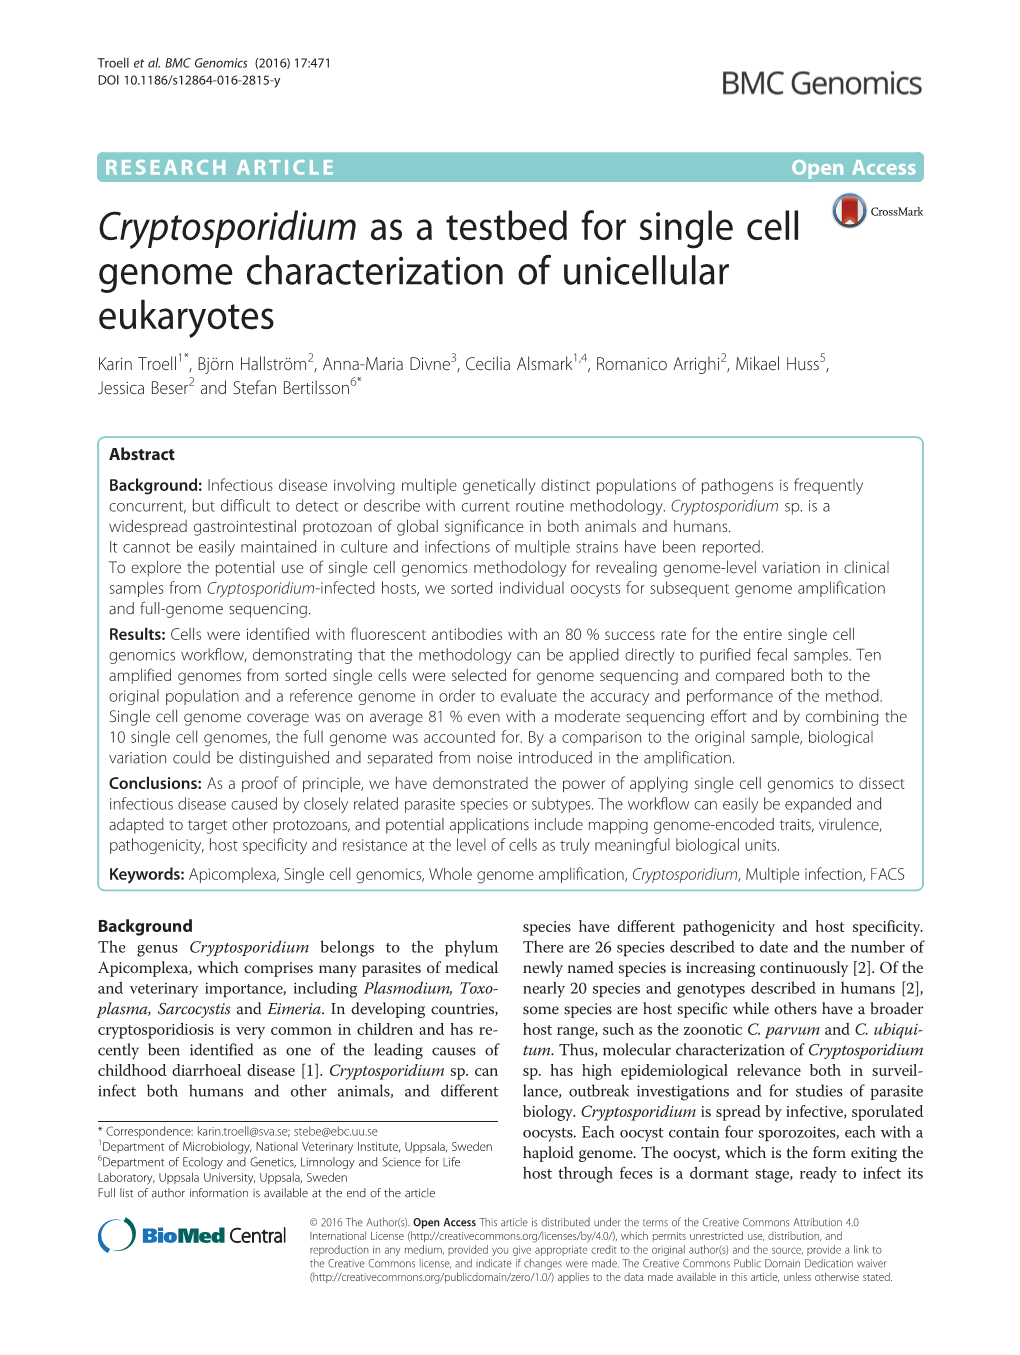 Cryptosporidium As a Testbed for Single Cell Genome Characterization